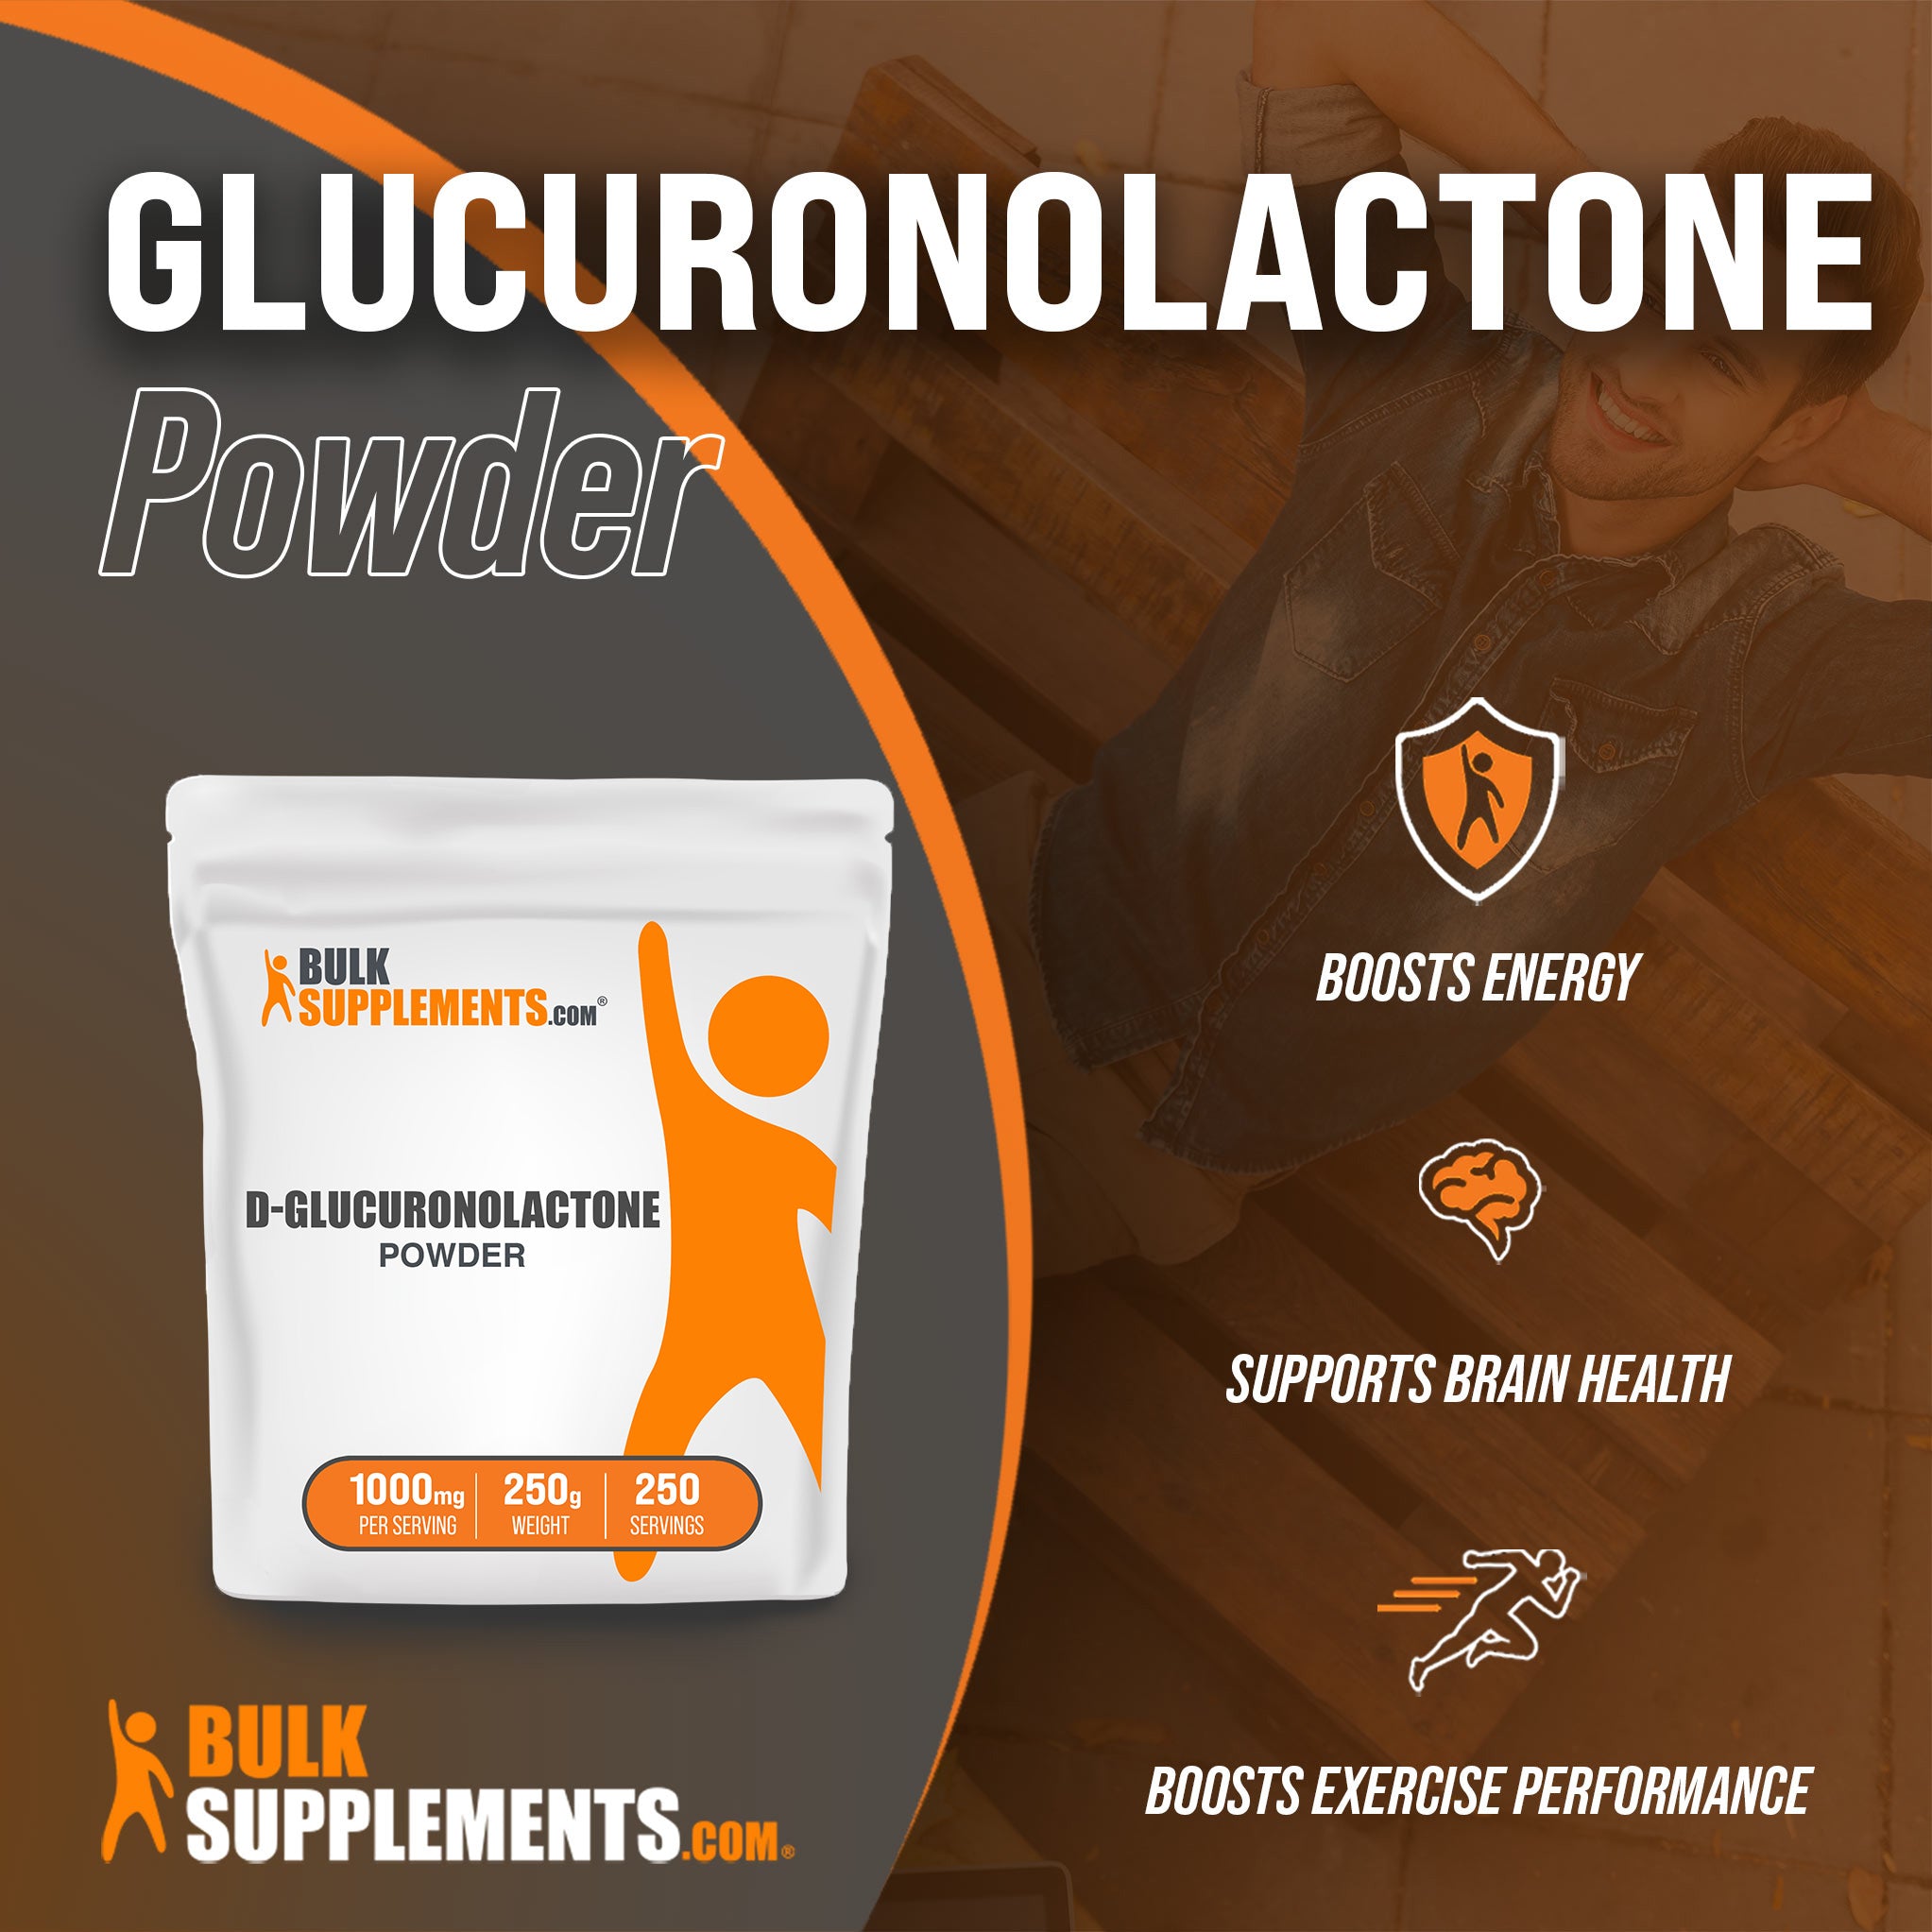 Benefits of D-Glucuronolactone; boosts energy, supports brain health, boosts exercise performance